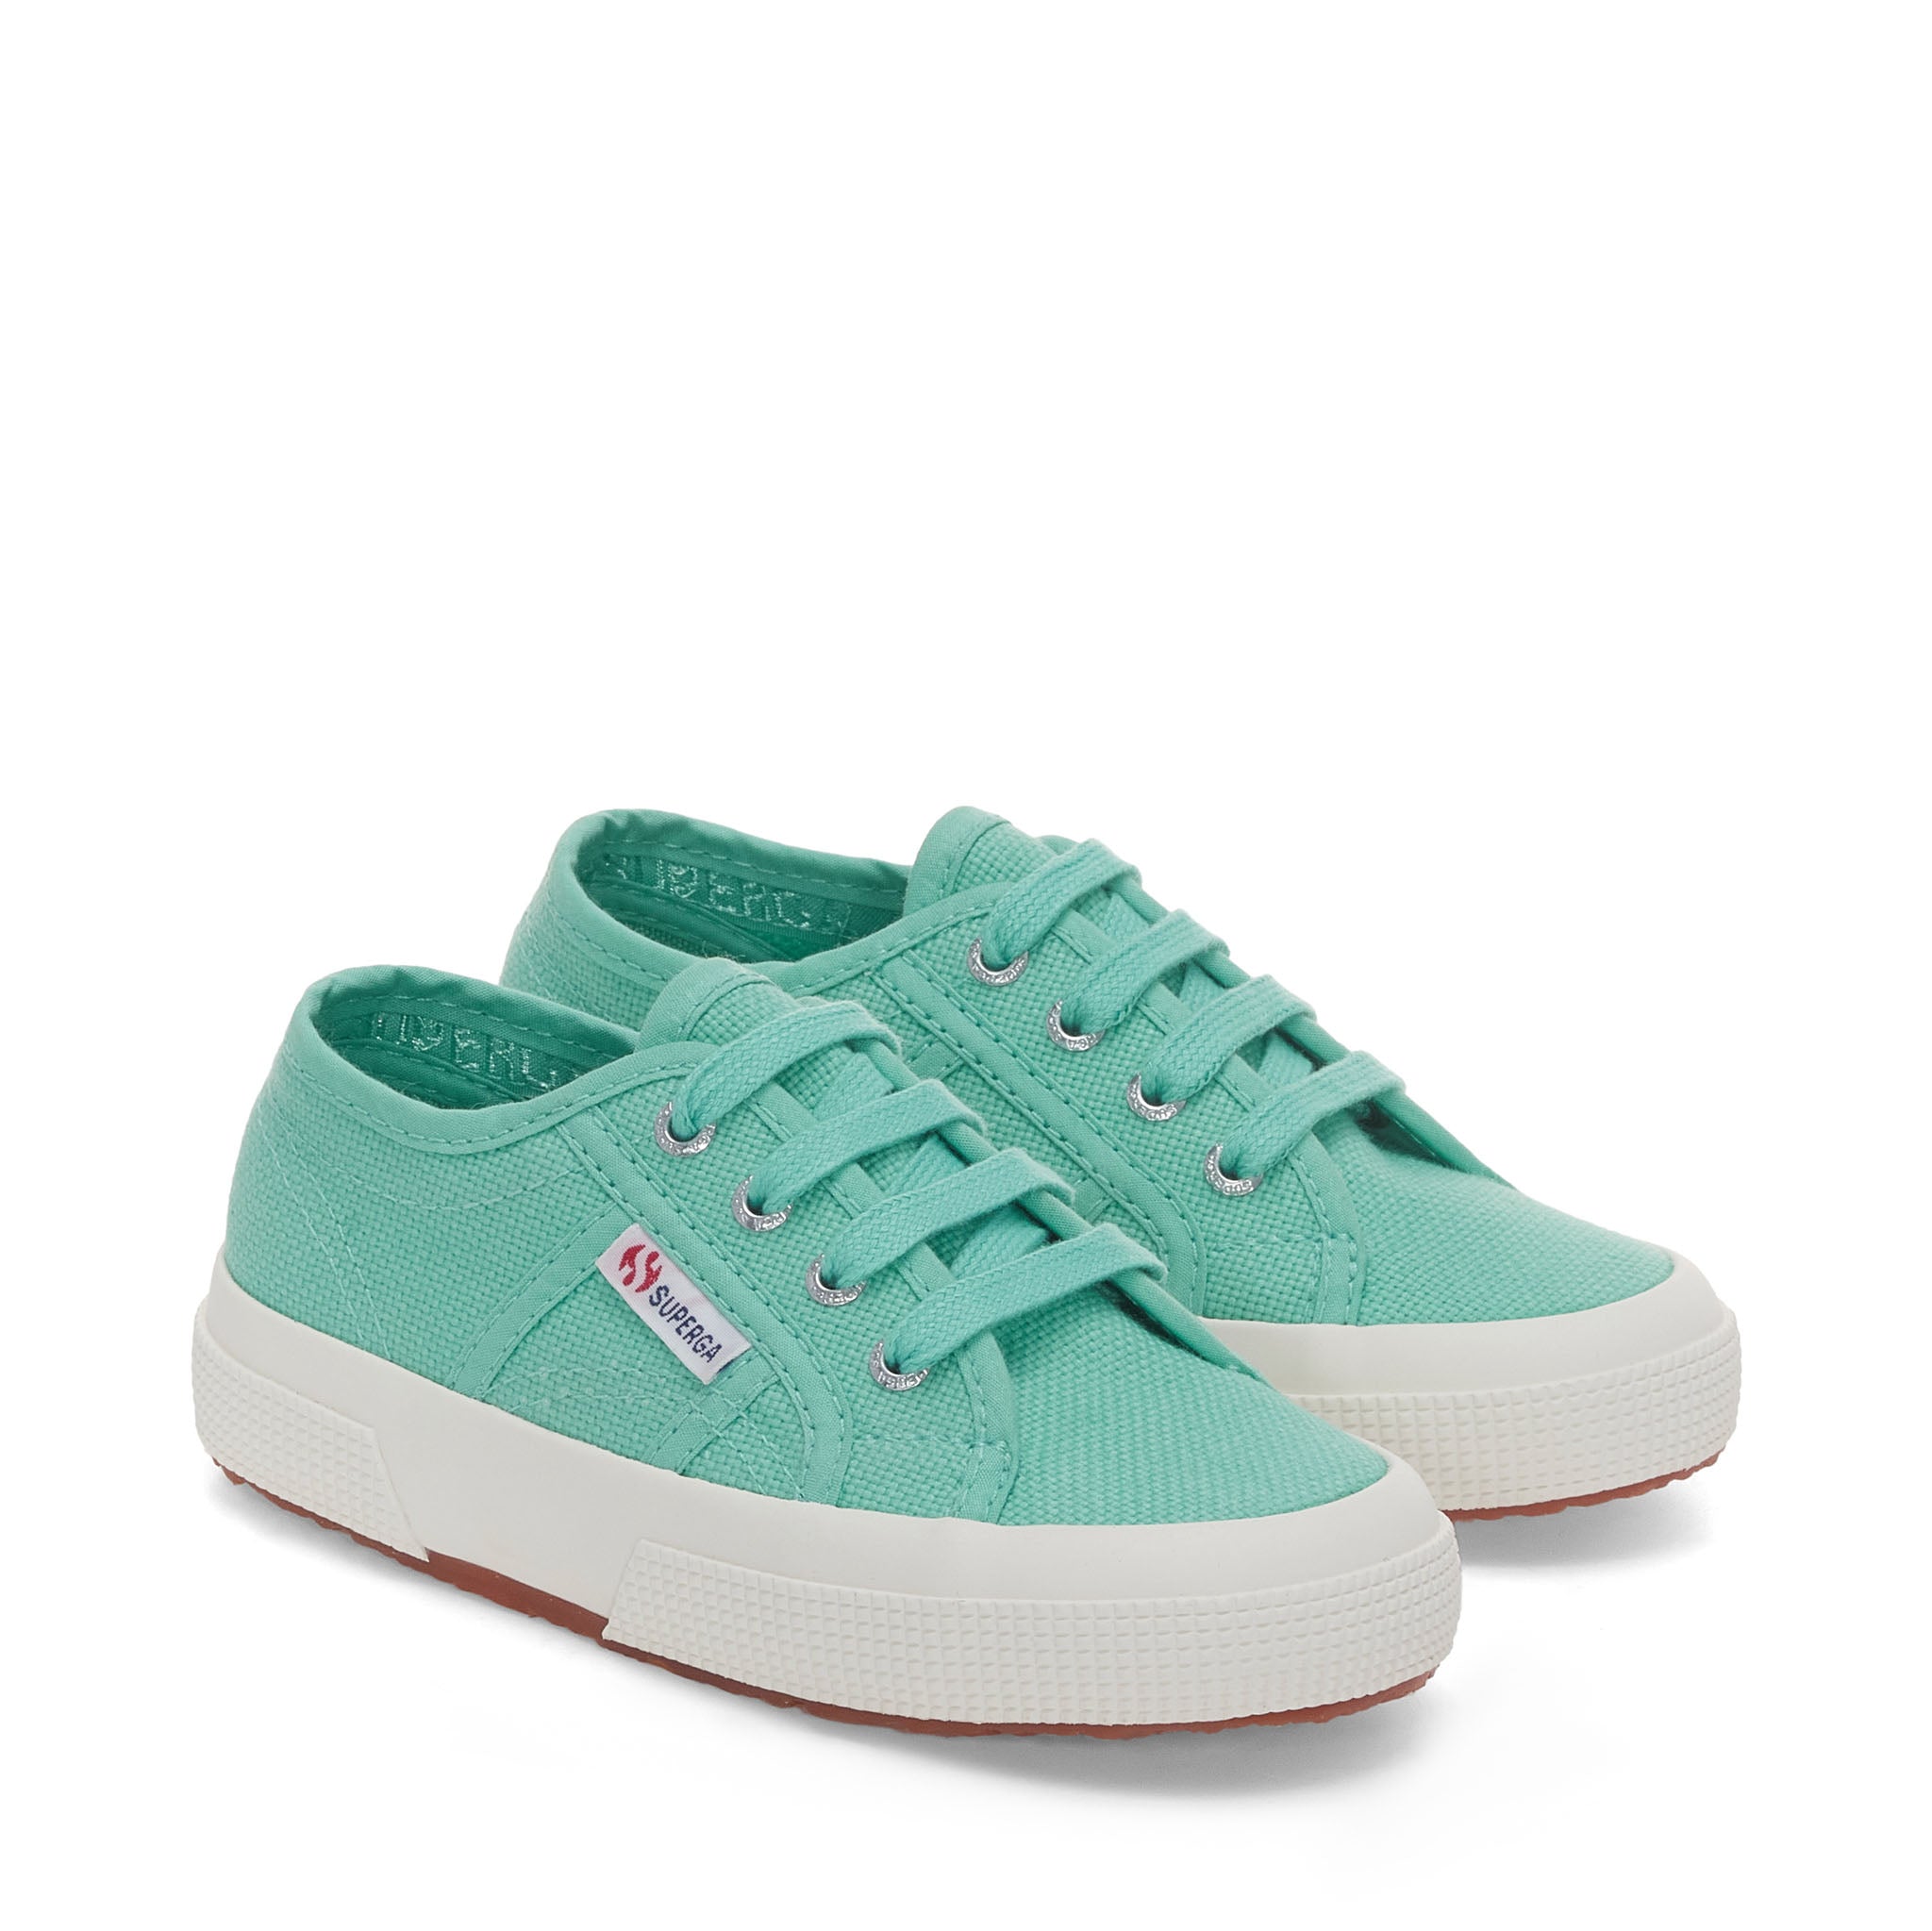 Superga 2750 Kids Jcot Classic Sneakers - Green Water. Front view.